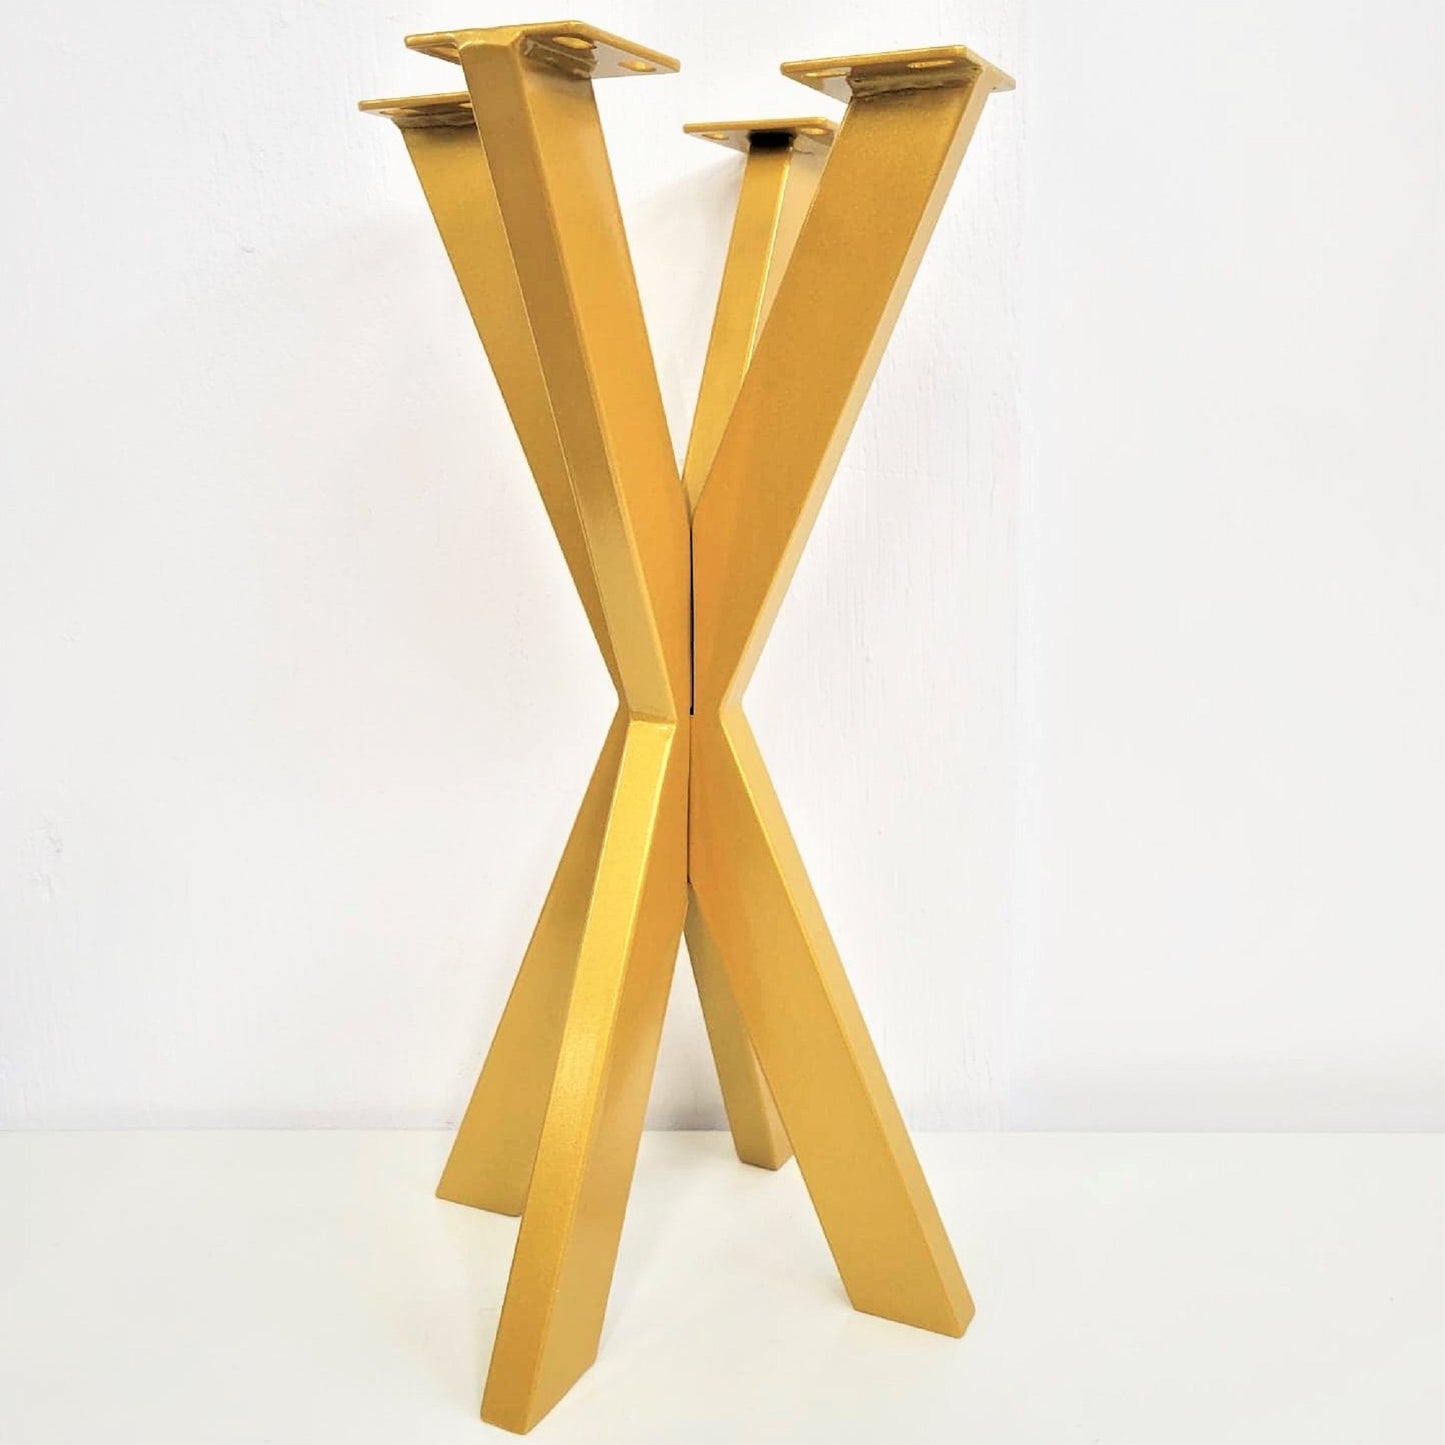 Spider Gold End Table Legs, Spider Gold Furniture Legs, Furniture Feet, Spider Metal Legs, Spider Steel Table Legs, Bench Legs, Metal Bench Base, Heavy Duty Bench Legs, Heavy Duty Bench Base